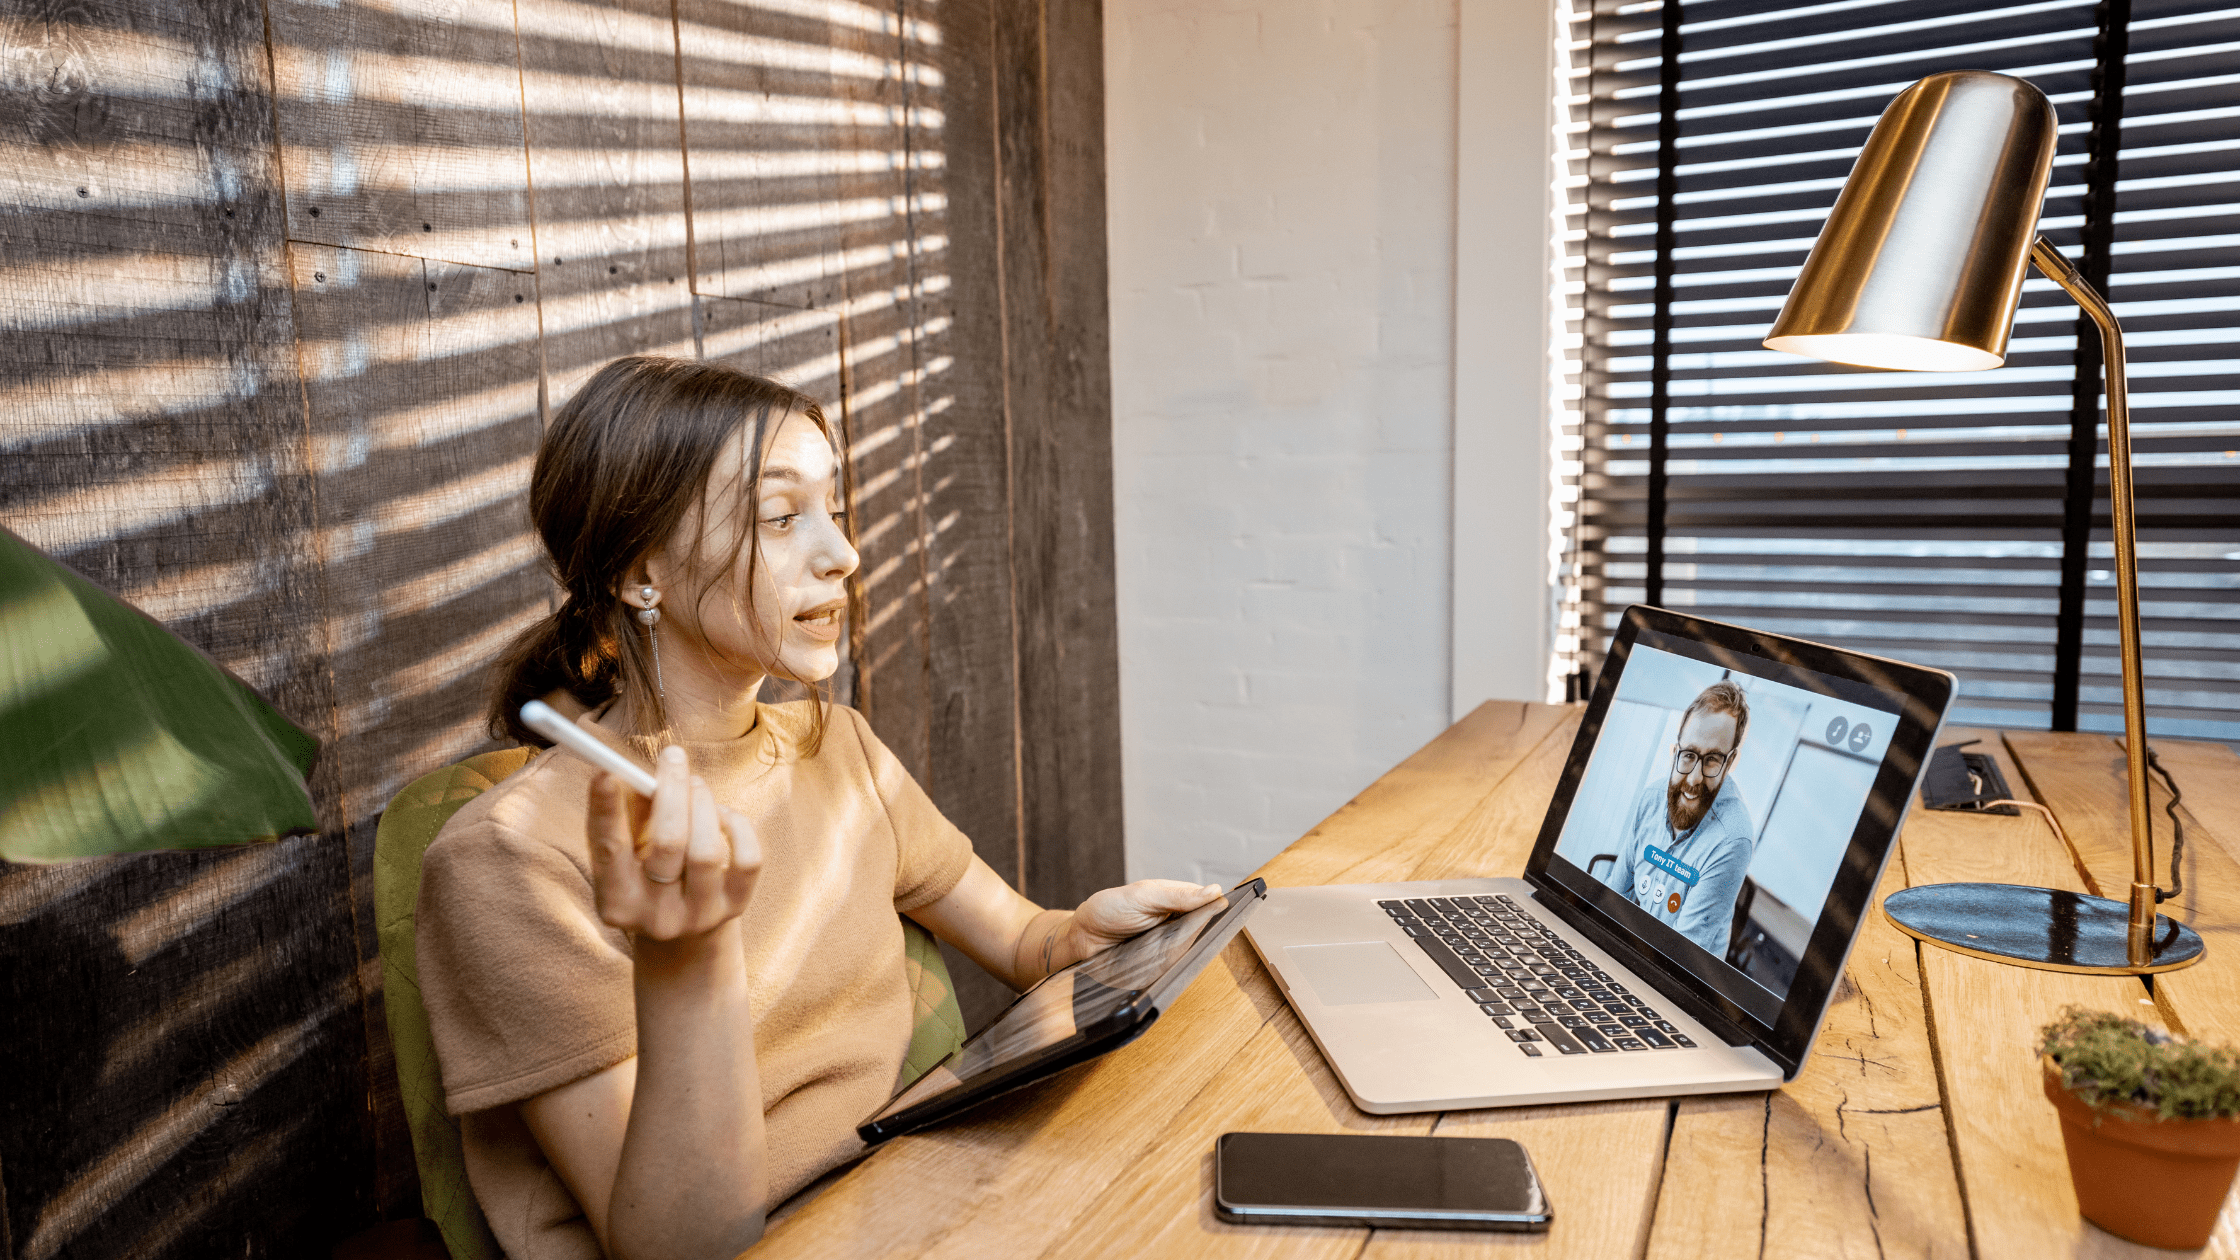 A medical residency applicant meeting with her advisor over a video chat meeting on her laptop.